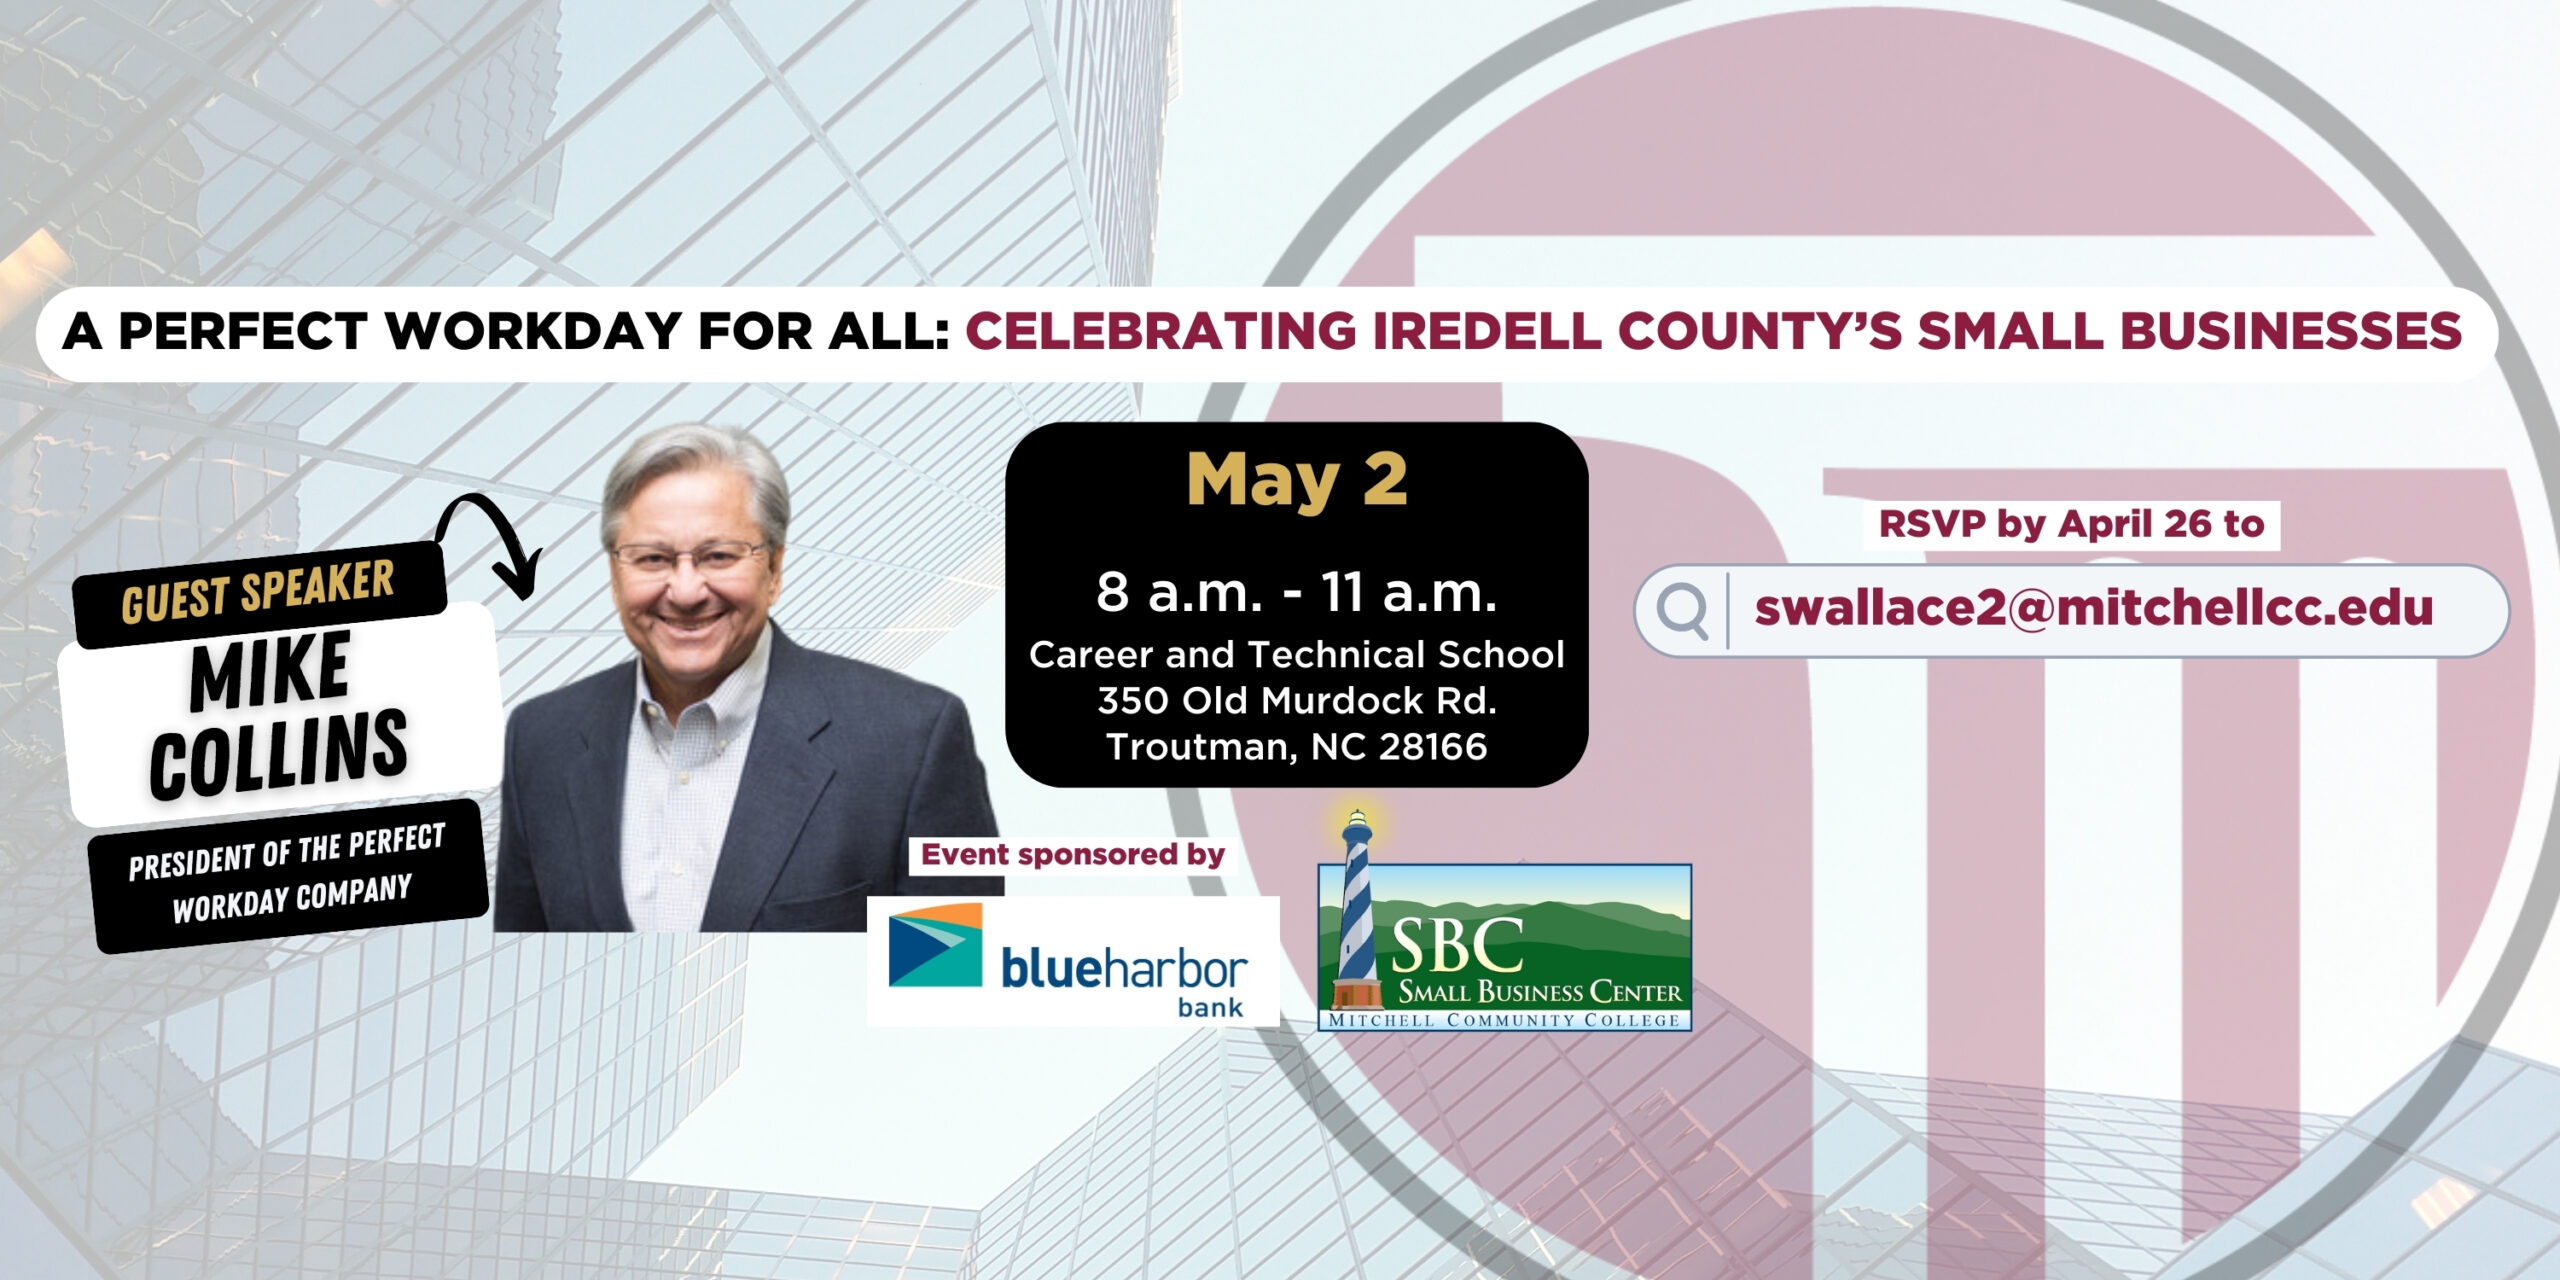 Banner that reads "A Perfect Workday For All: Celebrating Iredell County's Small Businesses | Guest Speaker Mike Collins - President of The Perfect Work Dat Company | May 2 - 8 a.m. - 11 a.m. Career and Technical School 350 Old Murdock Rd. Troutman, NC 28166 | RSVP by April 26 to swallace2@mitchellcc.edu"